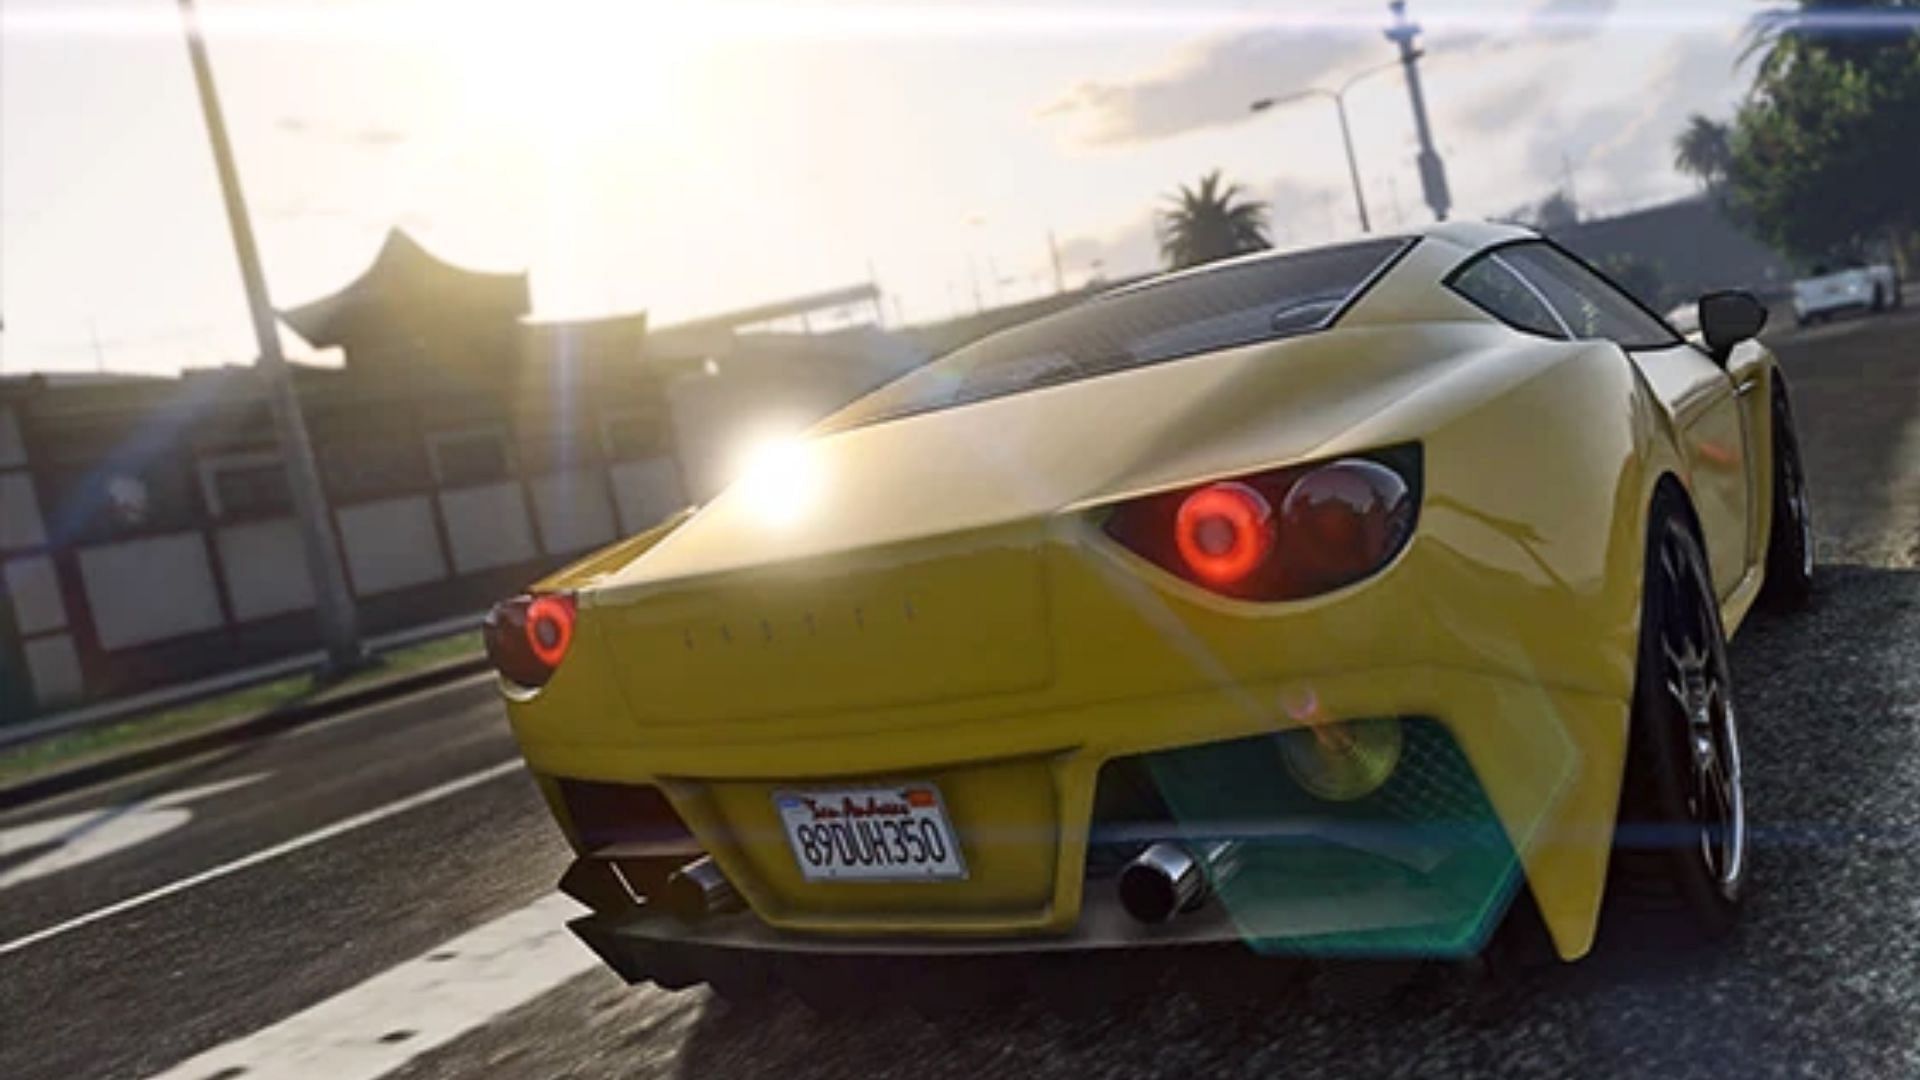 A screenshot of the Carbonizzare from Grand Theft Auto 5 Online (Image via Rockstar Games)